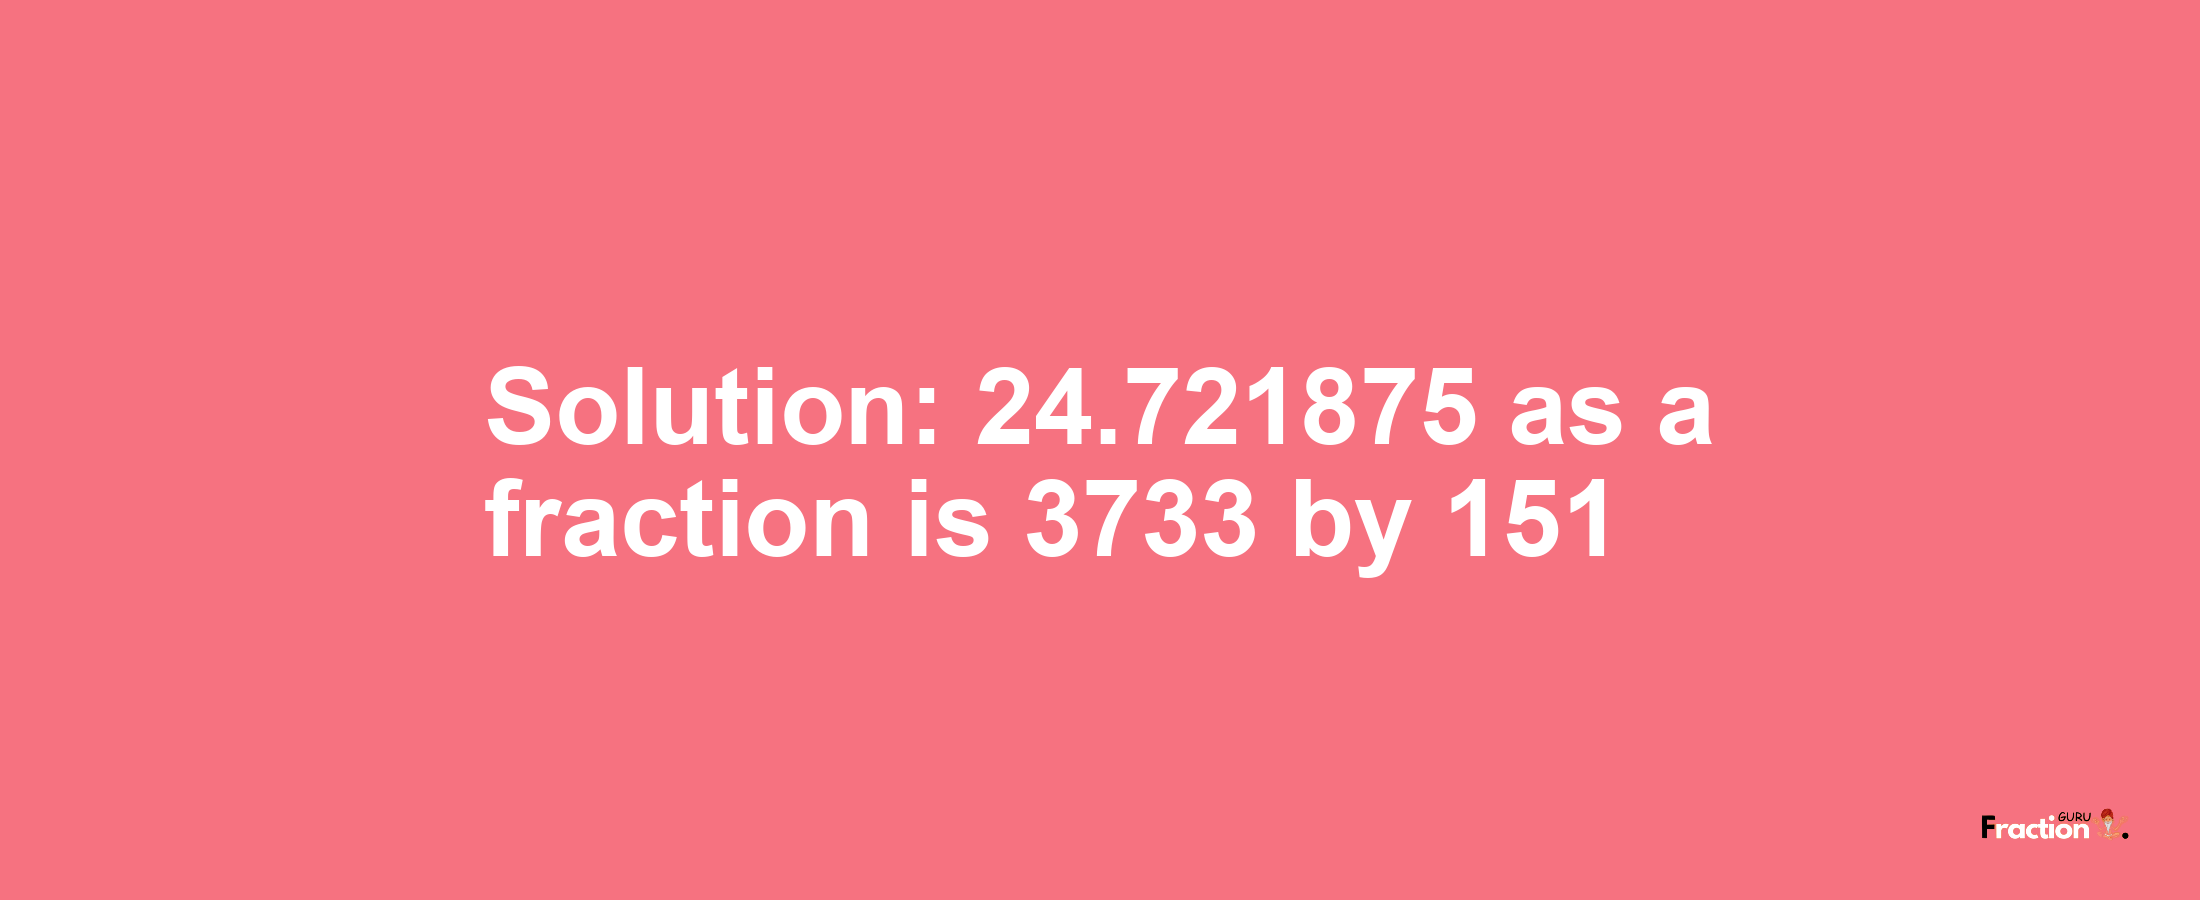 Solution:24.721875 as a fraction is 3733/151